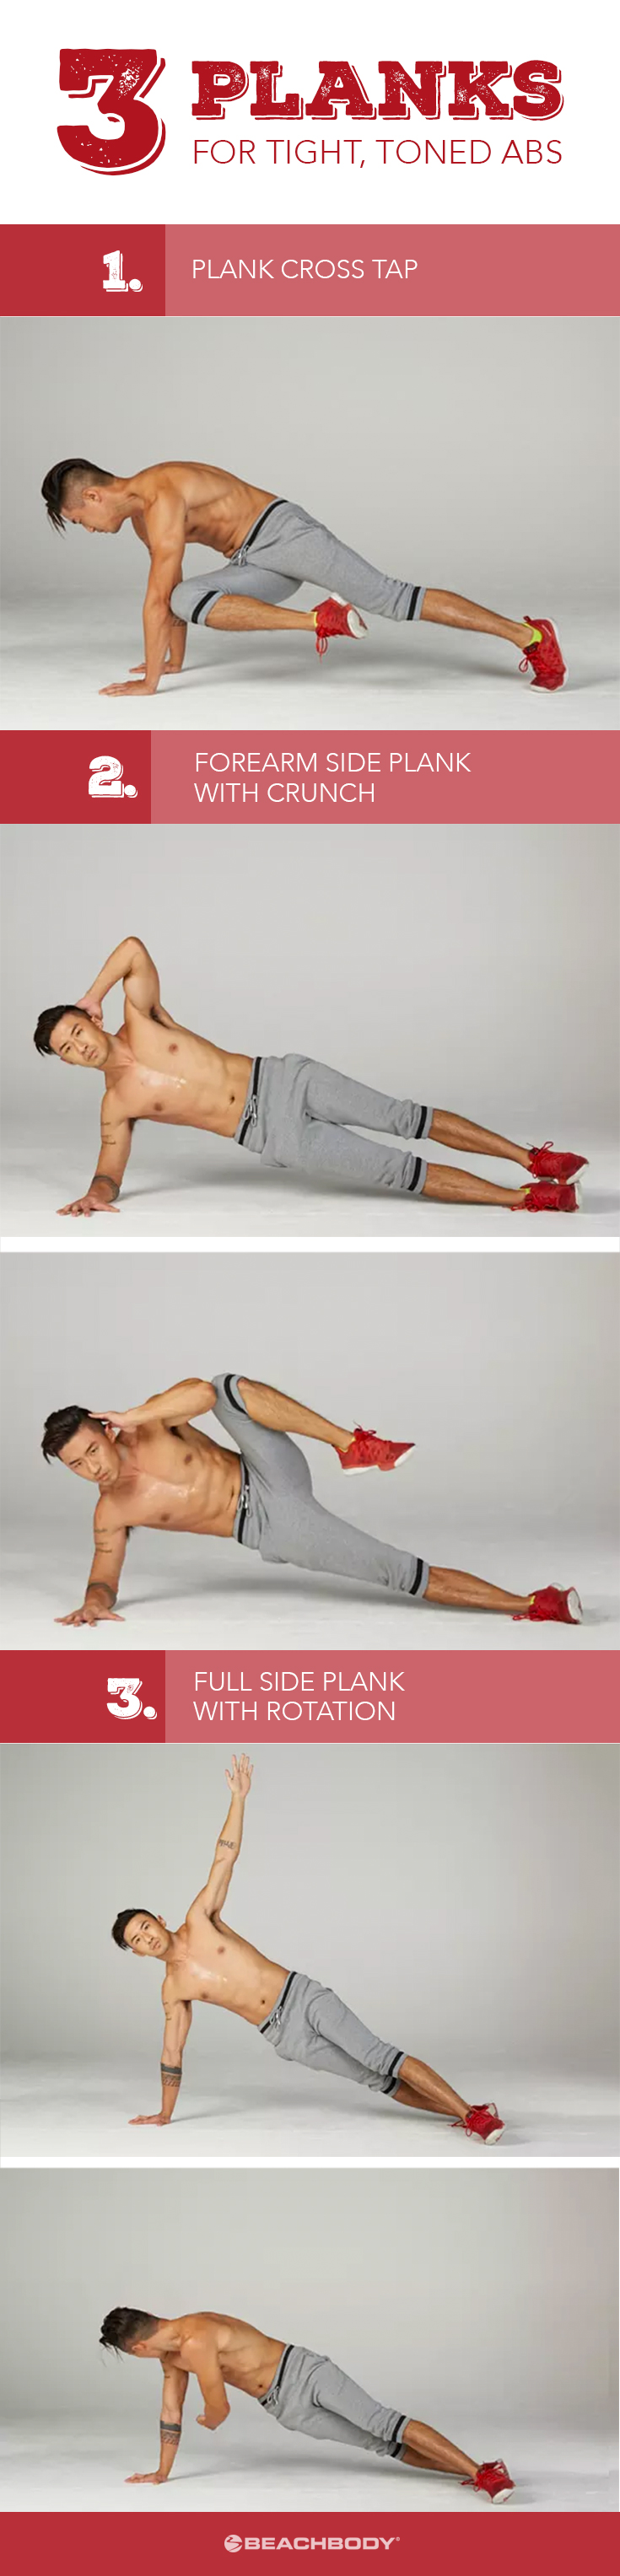 Plank exercises benefits are many. The plank is one of the best overall core conditioners around, and unlike crunches, it keeps your spine protected in a neutral position. Here are 3 ab workouts to strengthen core and lose excess belly fat.